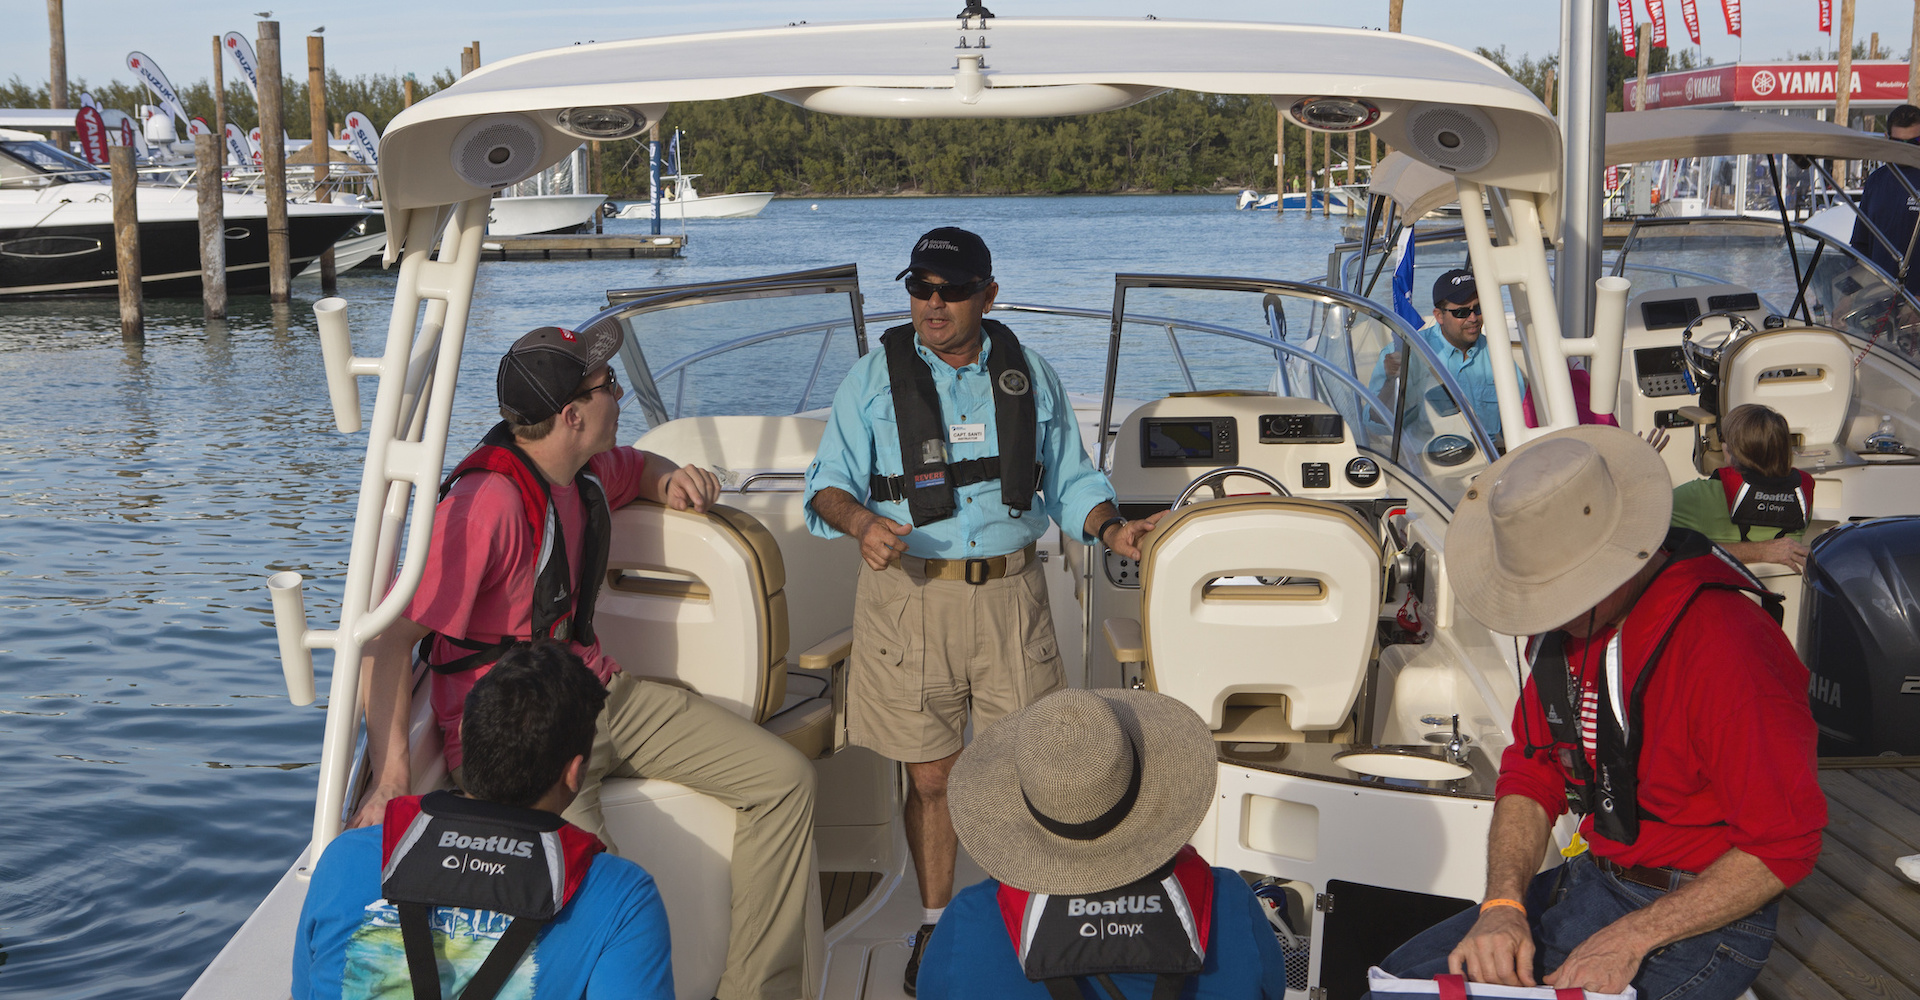 boating courses, education and training